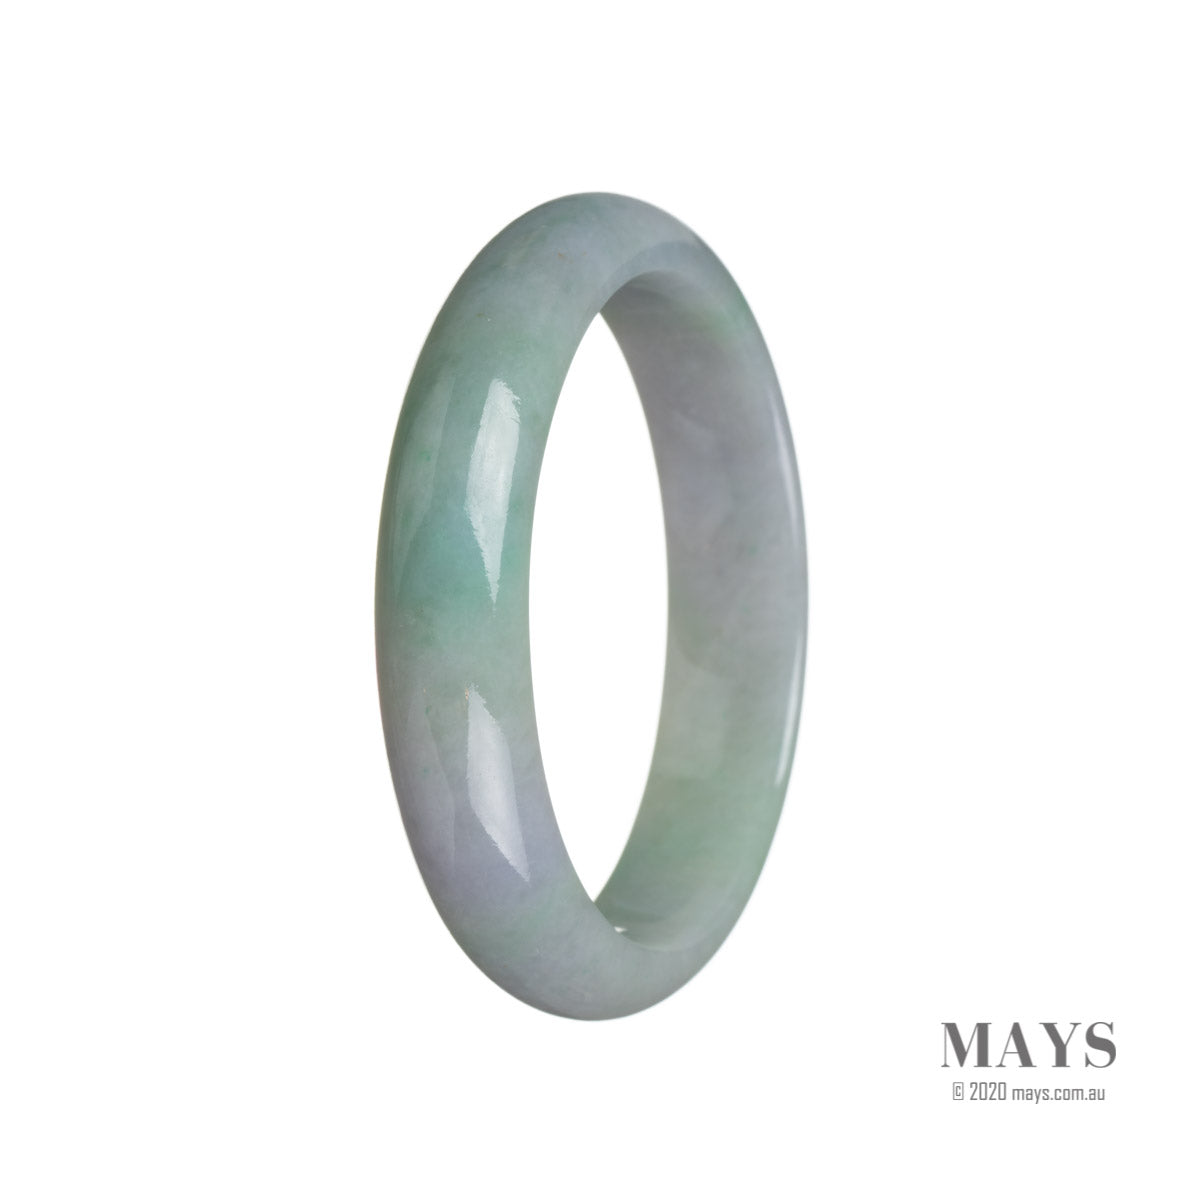 A close-up image of a stunning jadeite bangle in a half moon shape. The bangle is made of real Type A green jadeite, with a vibrant green color and hints of lavender. The intricate patterns and smooth texture of the jadeite can be seen, creating a visually appealing piece of jewelry.